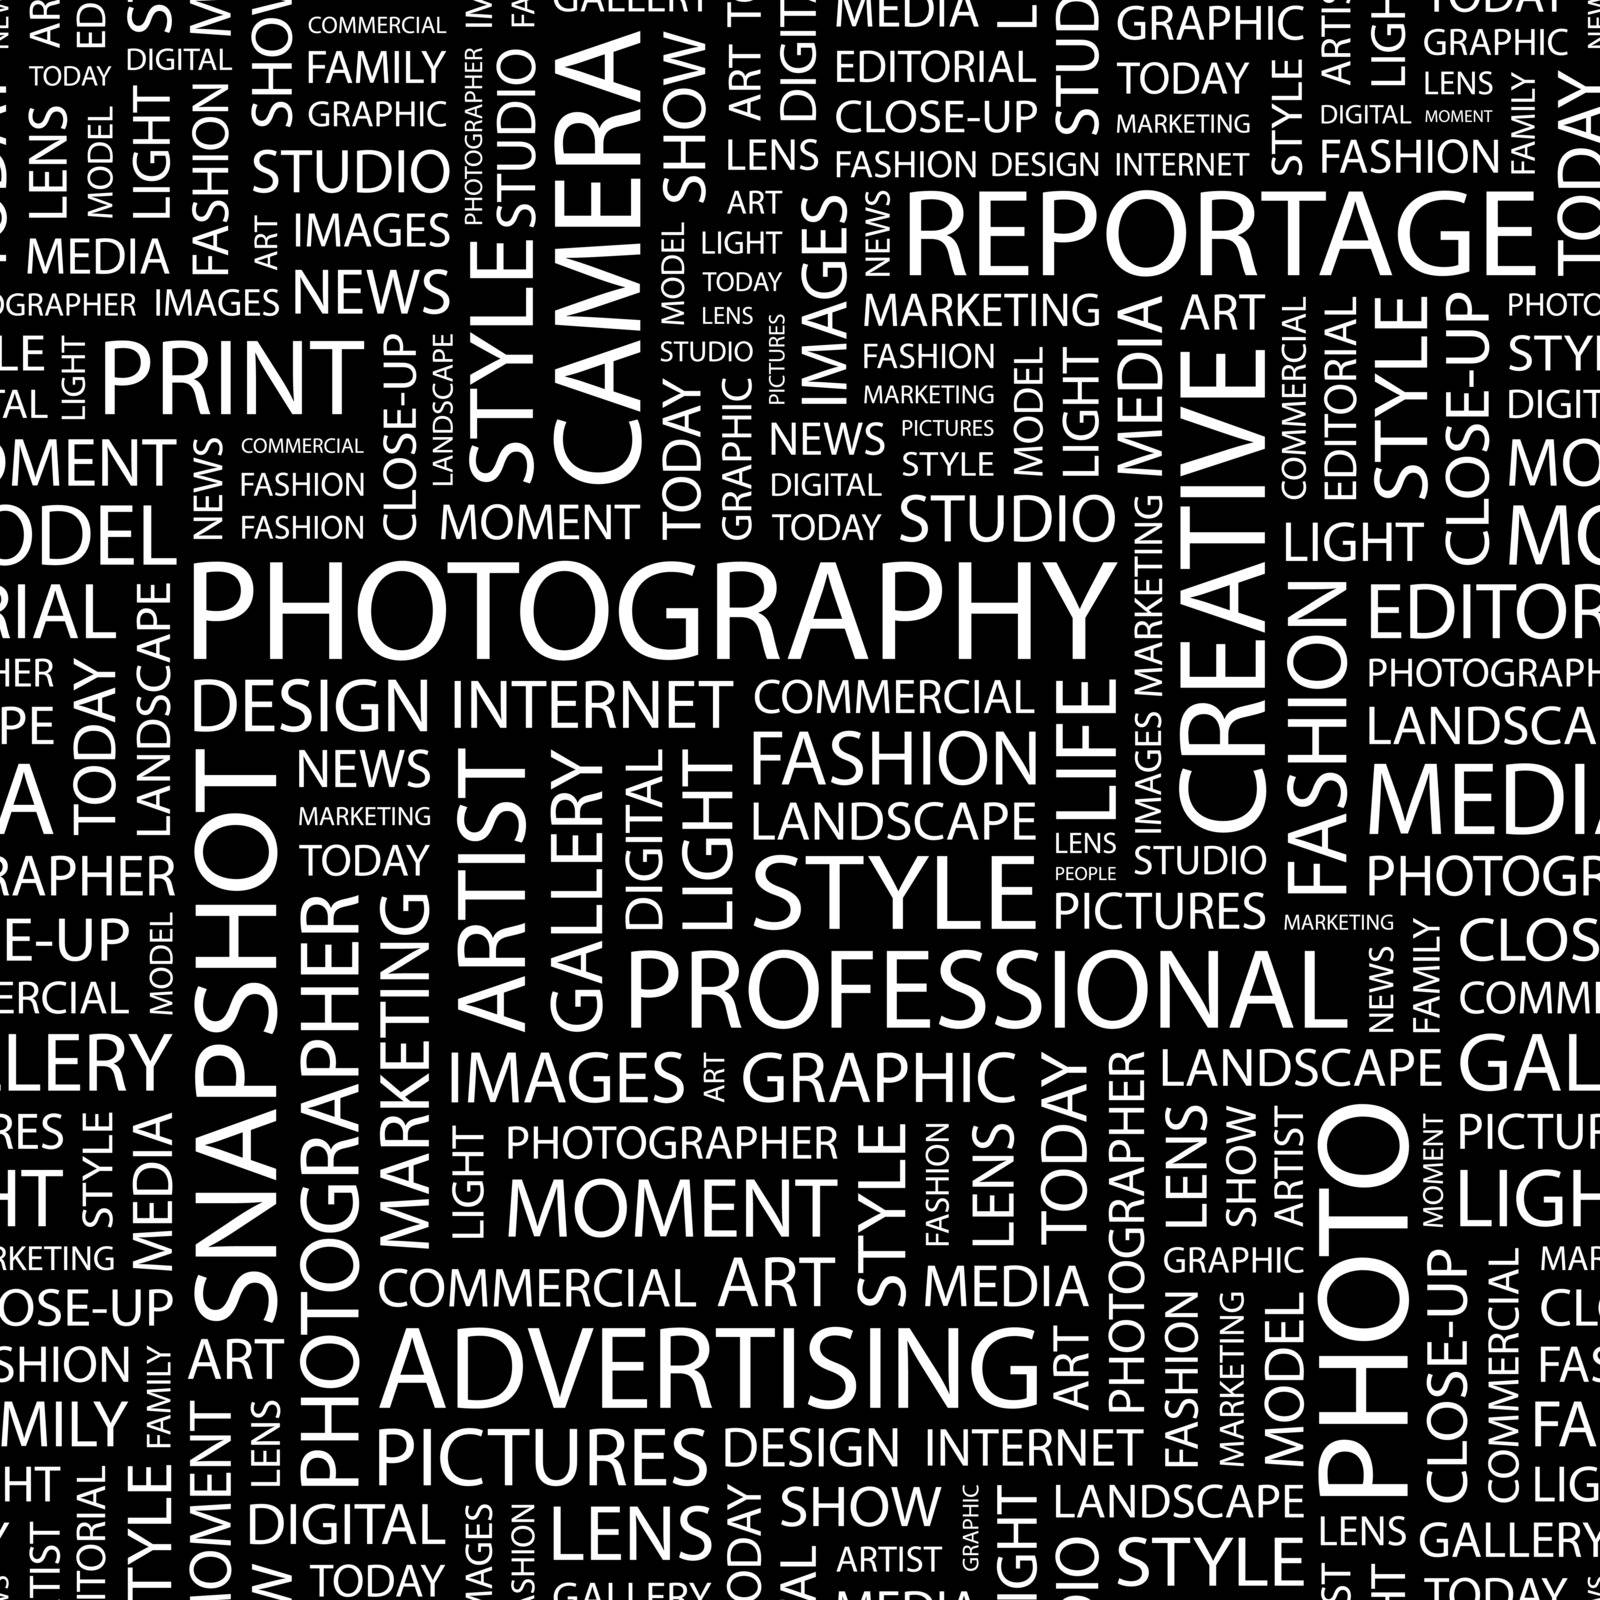 PHOTOGRAPHY. Seamless pattern. Word cloud illustration.